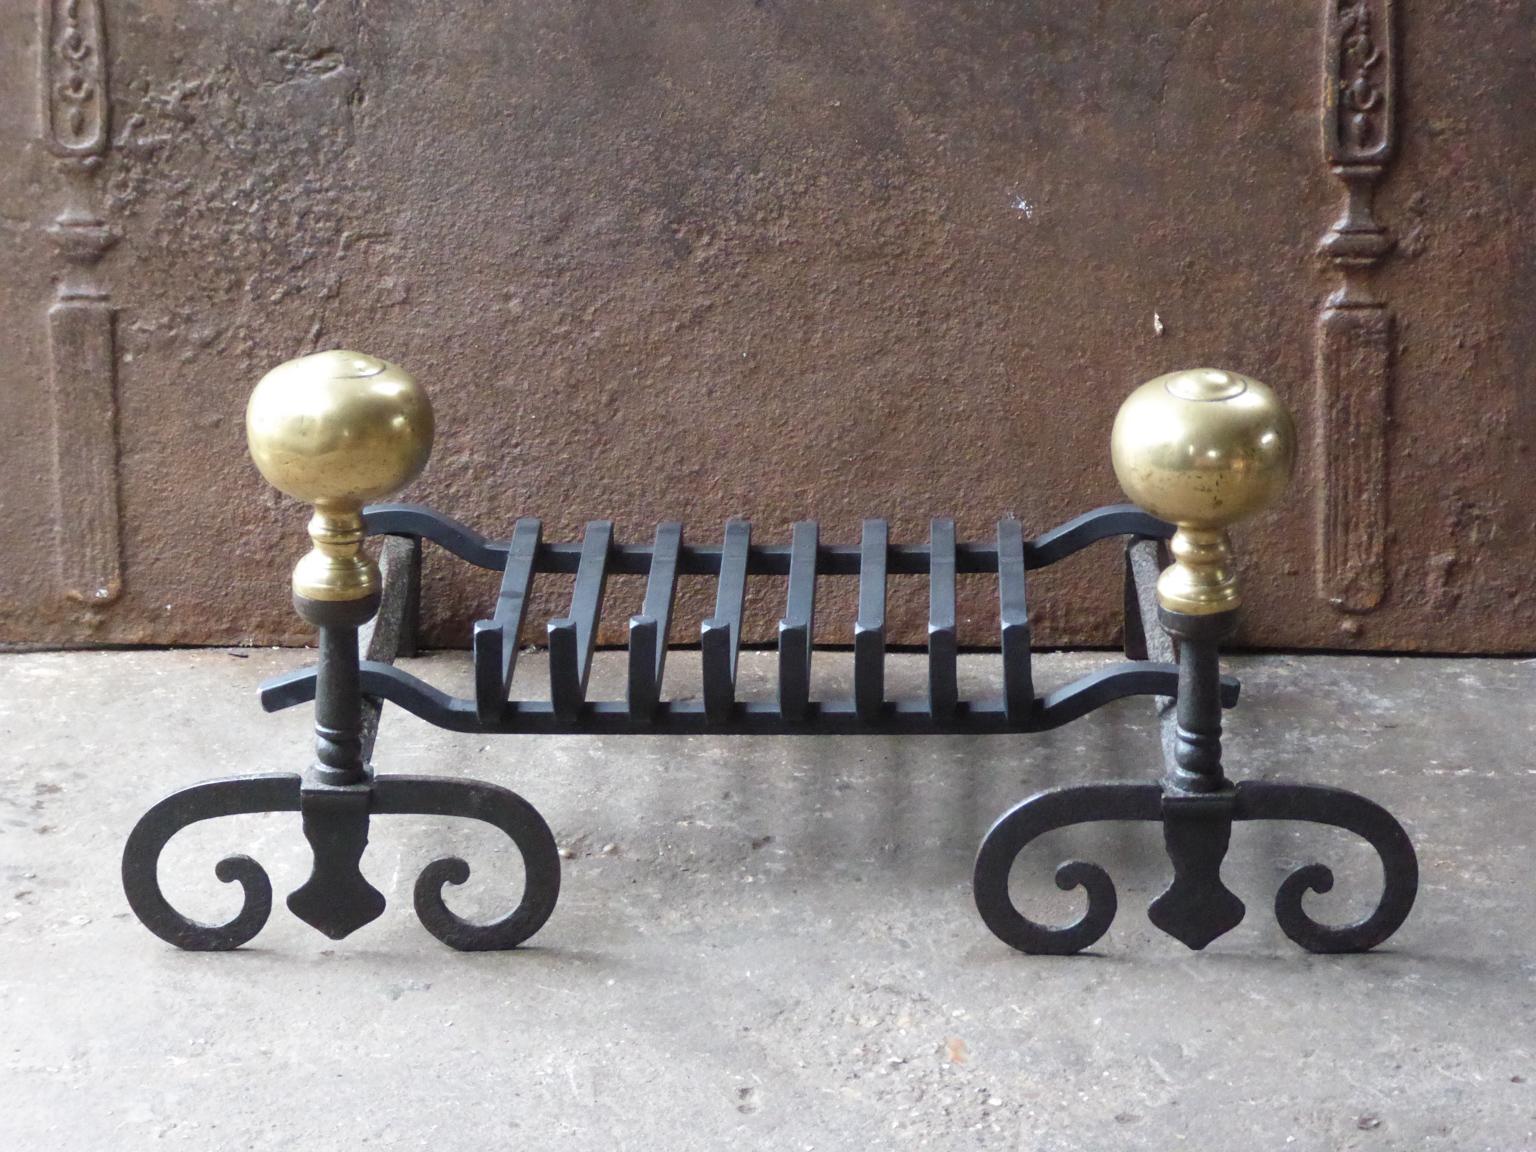 18th century French Louis XV fireplace basket, fire basket made of wrought iron and bronze. The basket is in a good condition and is fully functional. The total width of the front of the grate is 68.5 cm (27.0 inch).